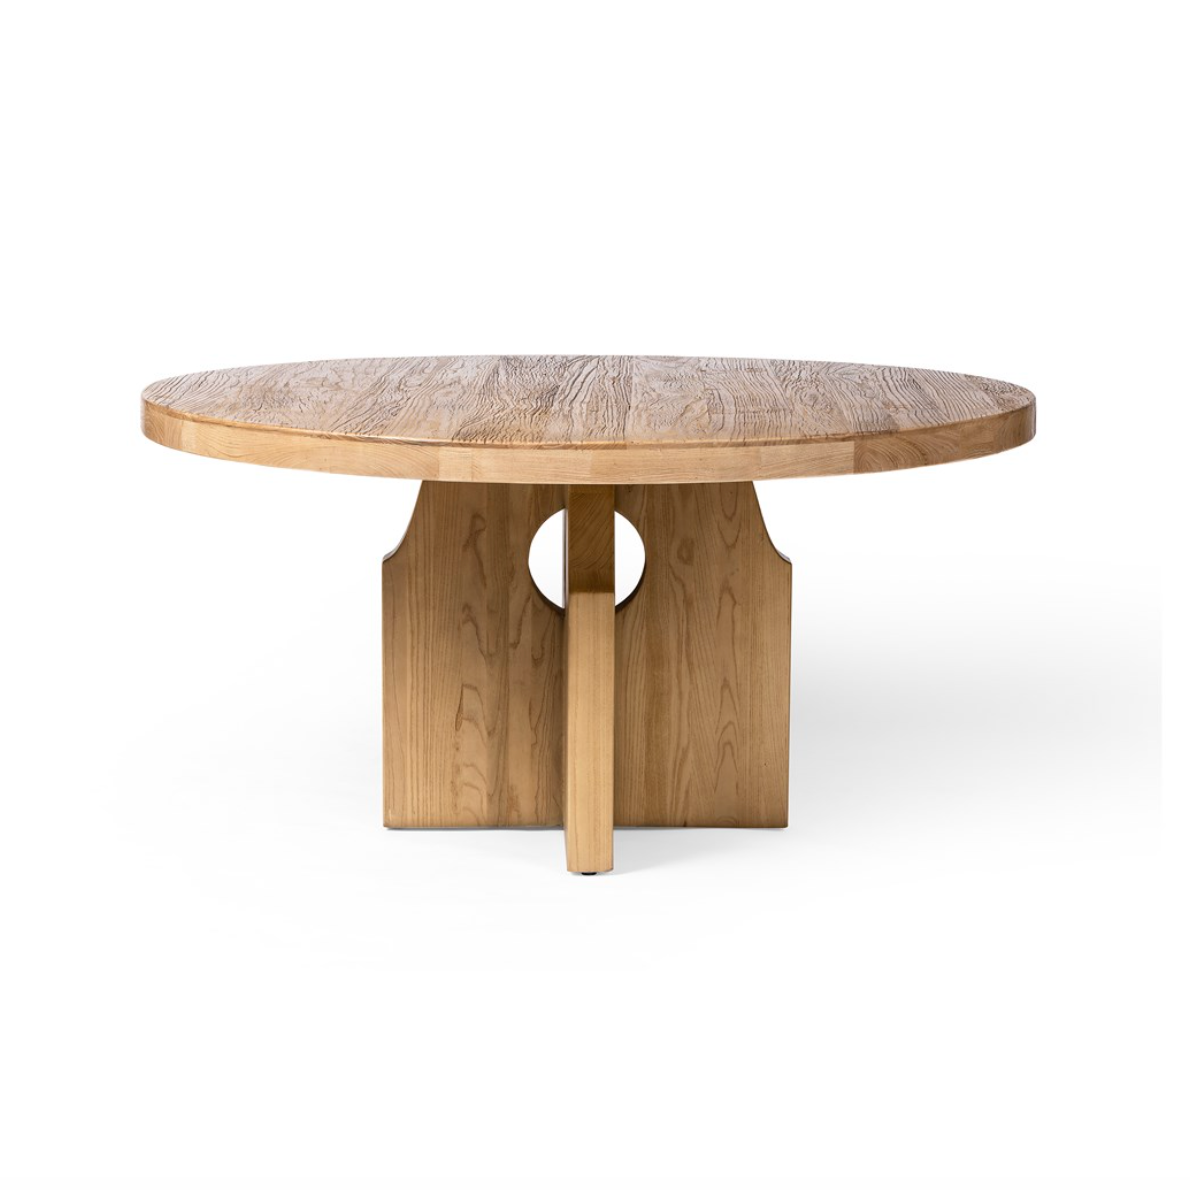 Allandale Round Dining Table